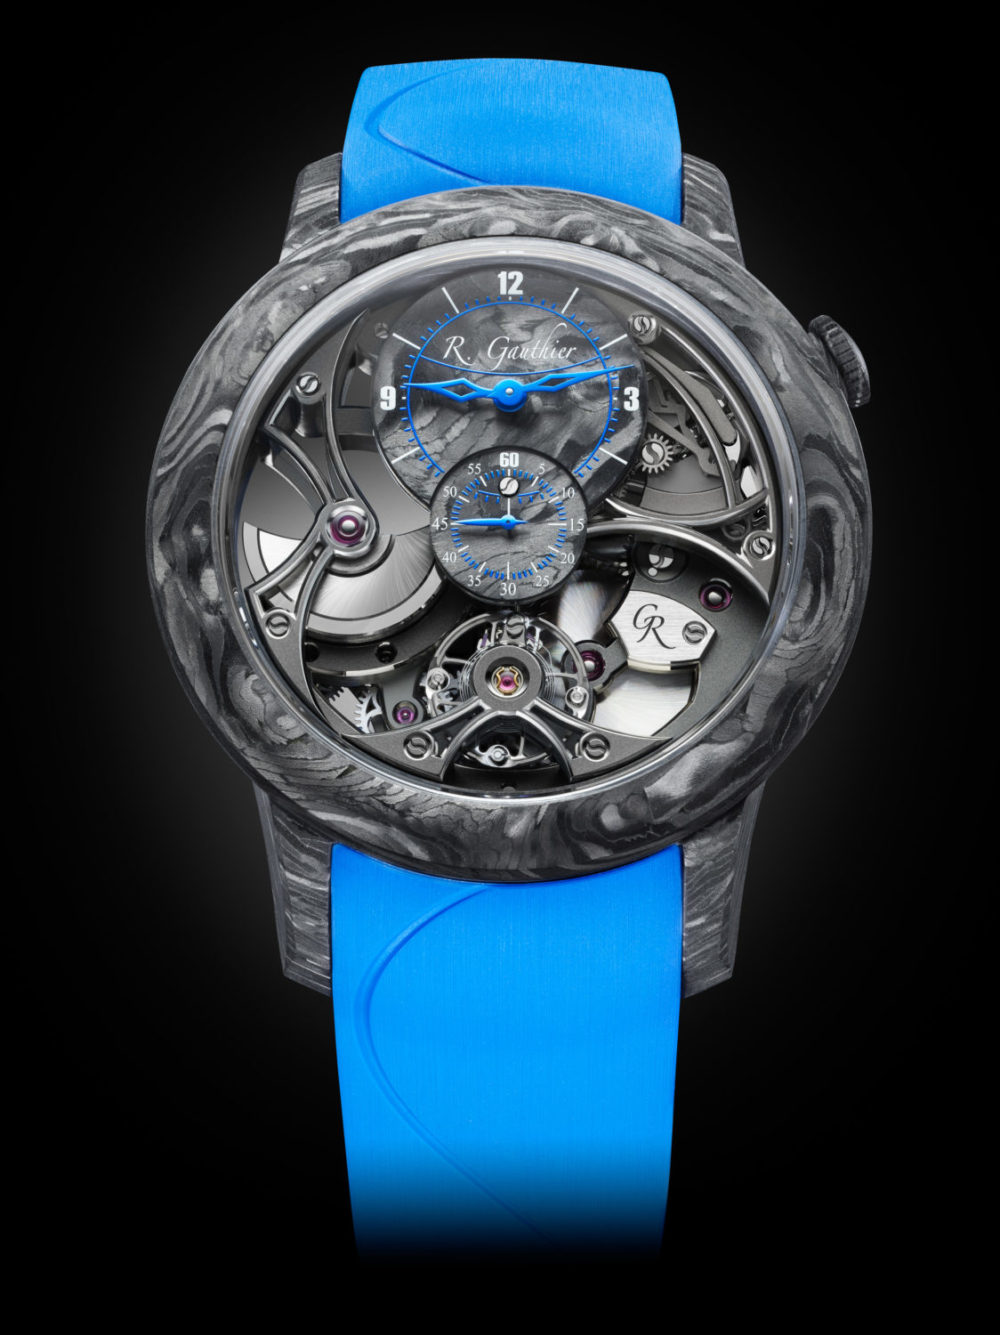 Romain Gauthier’s Insight Micro-rotor Squelette Manufacture-Only Carbonium Edition